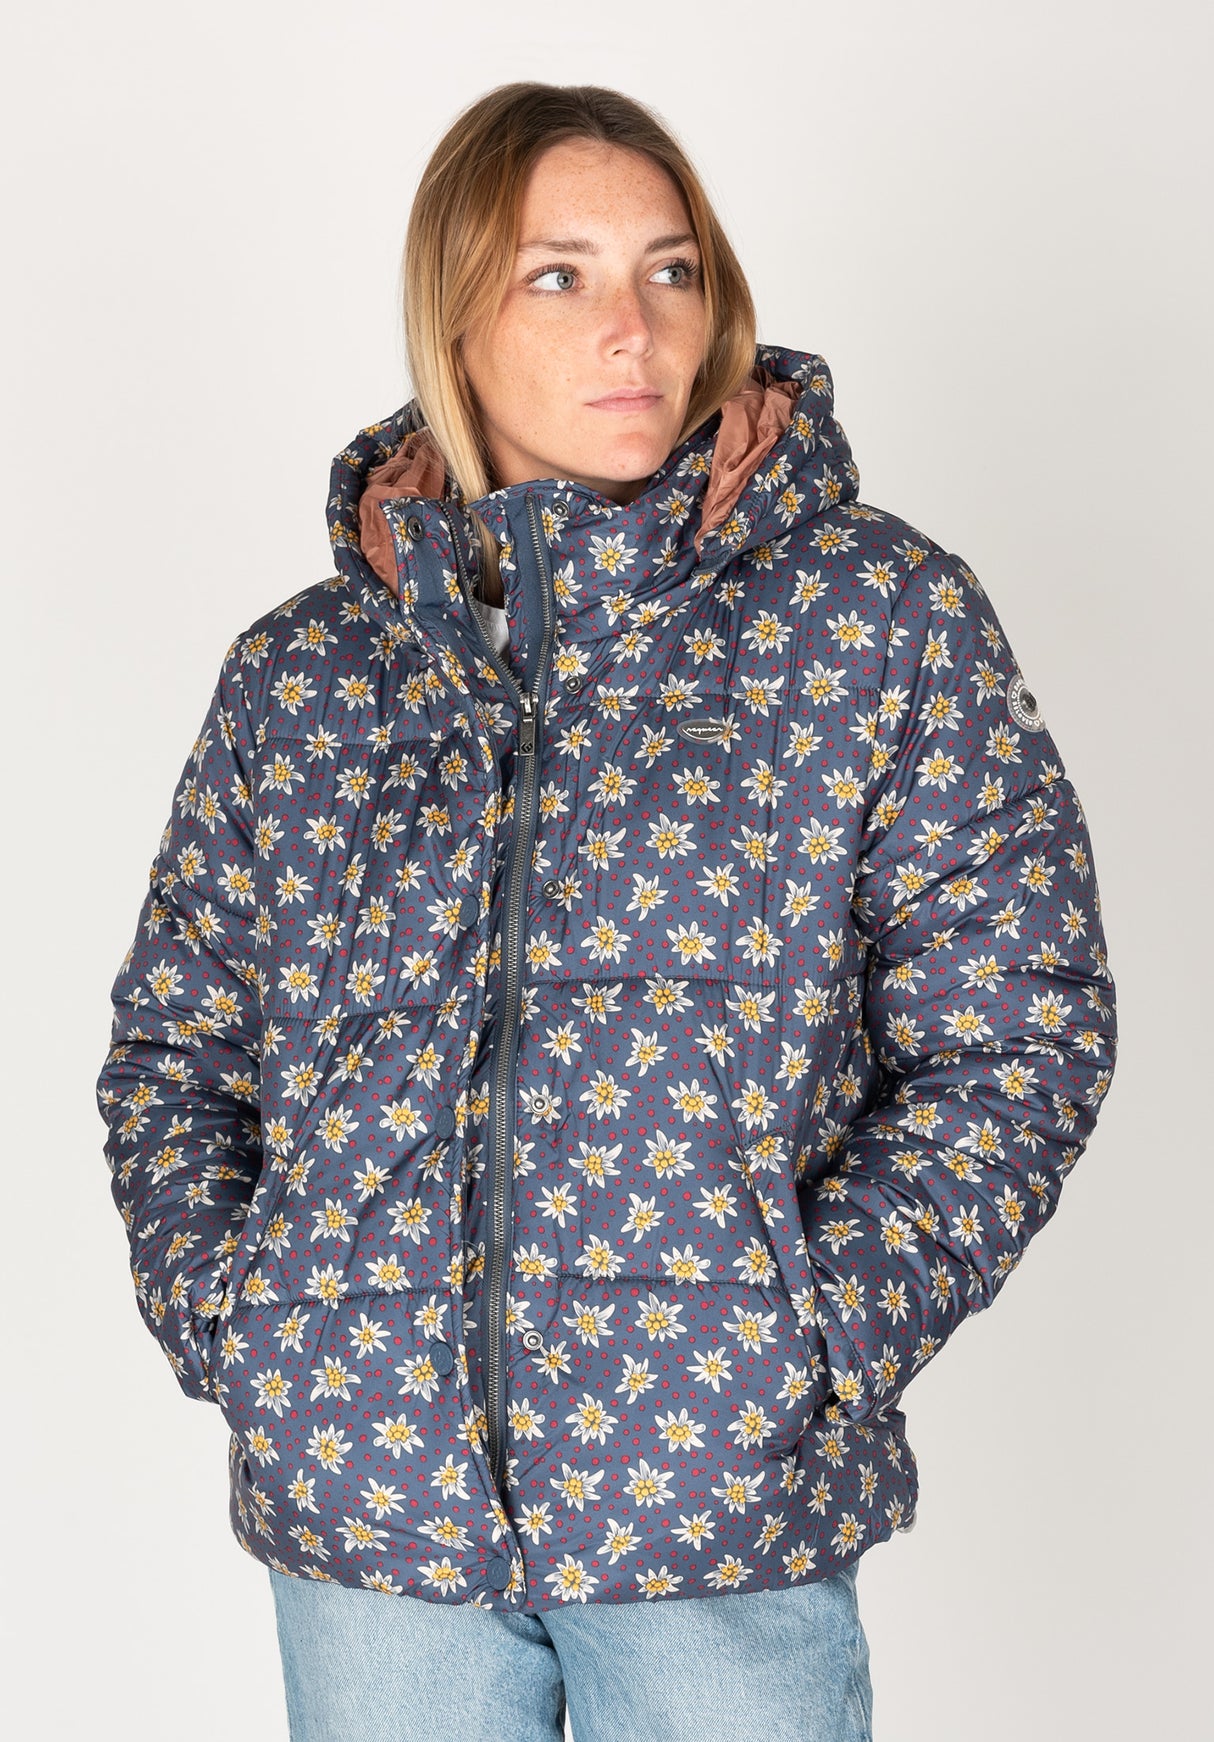 TITUS – Winter Ragwear in Relive Jackets for blue Women